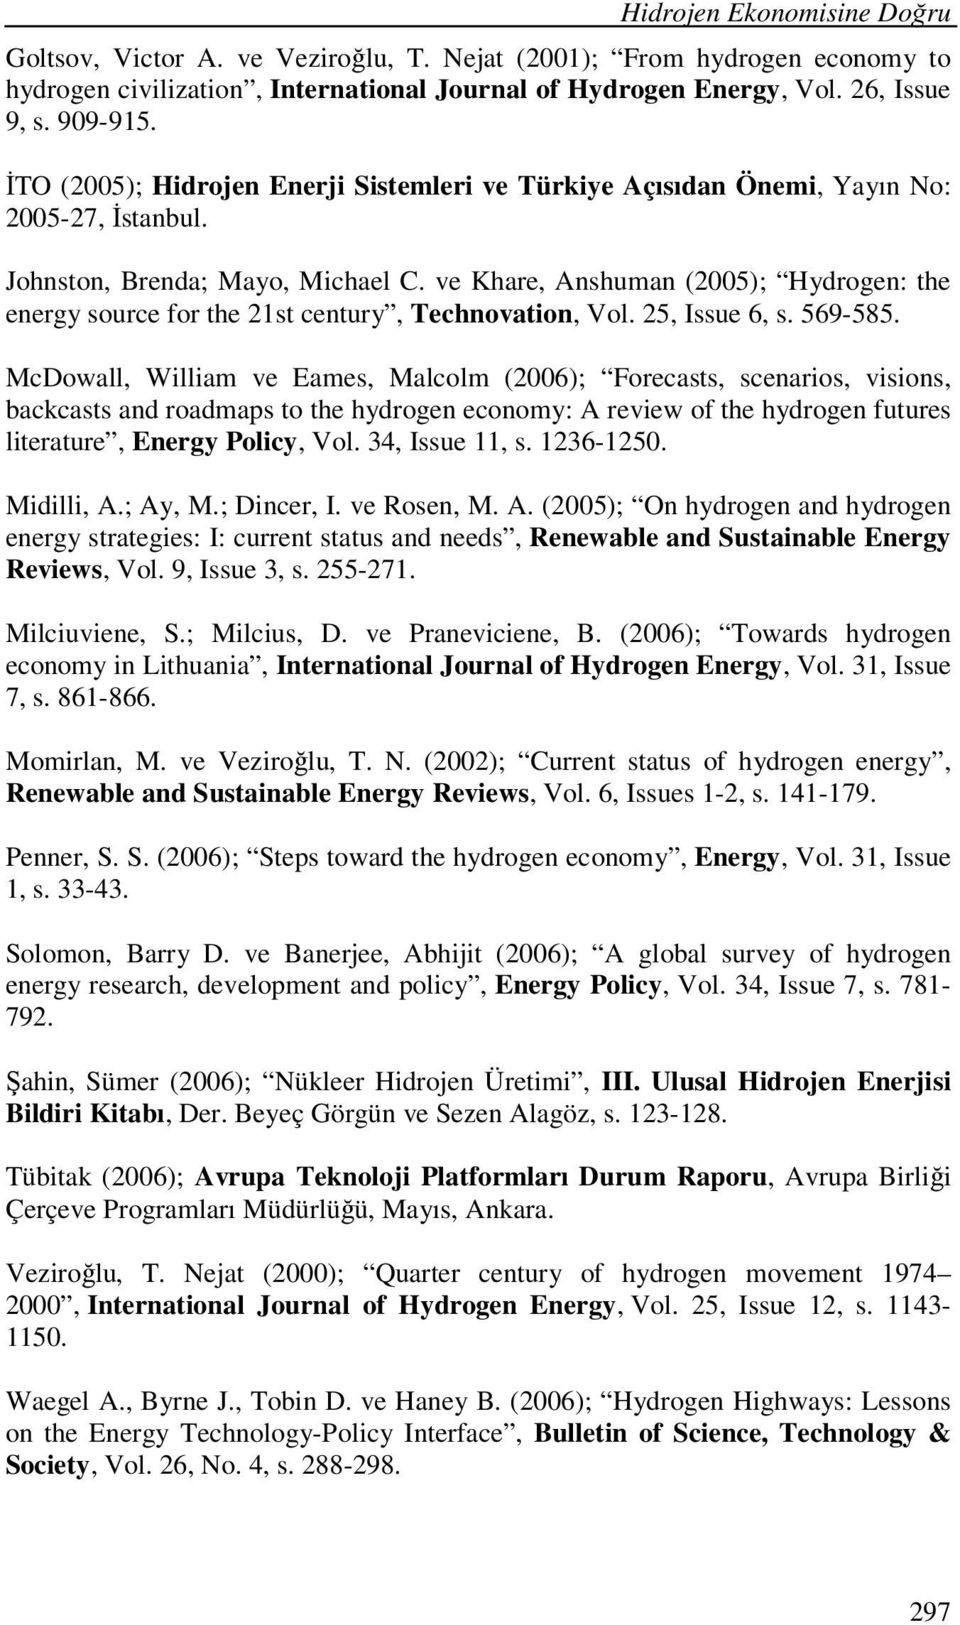 ve Khare, Anshuman (2005); Hydrogen: the energy source for the 21st century, Technovation, Vol. 25, Issue 6, s. 569-585.